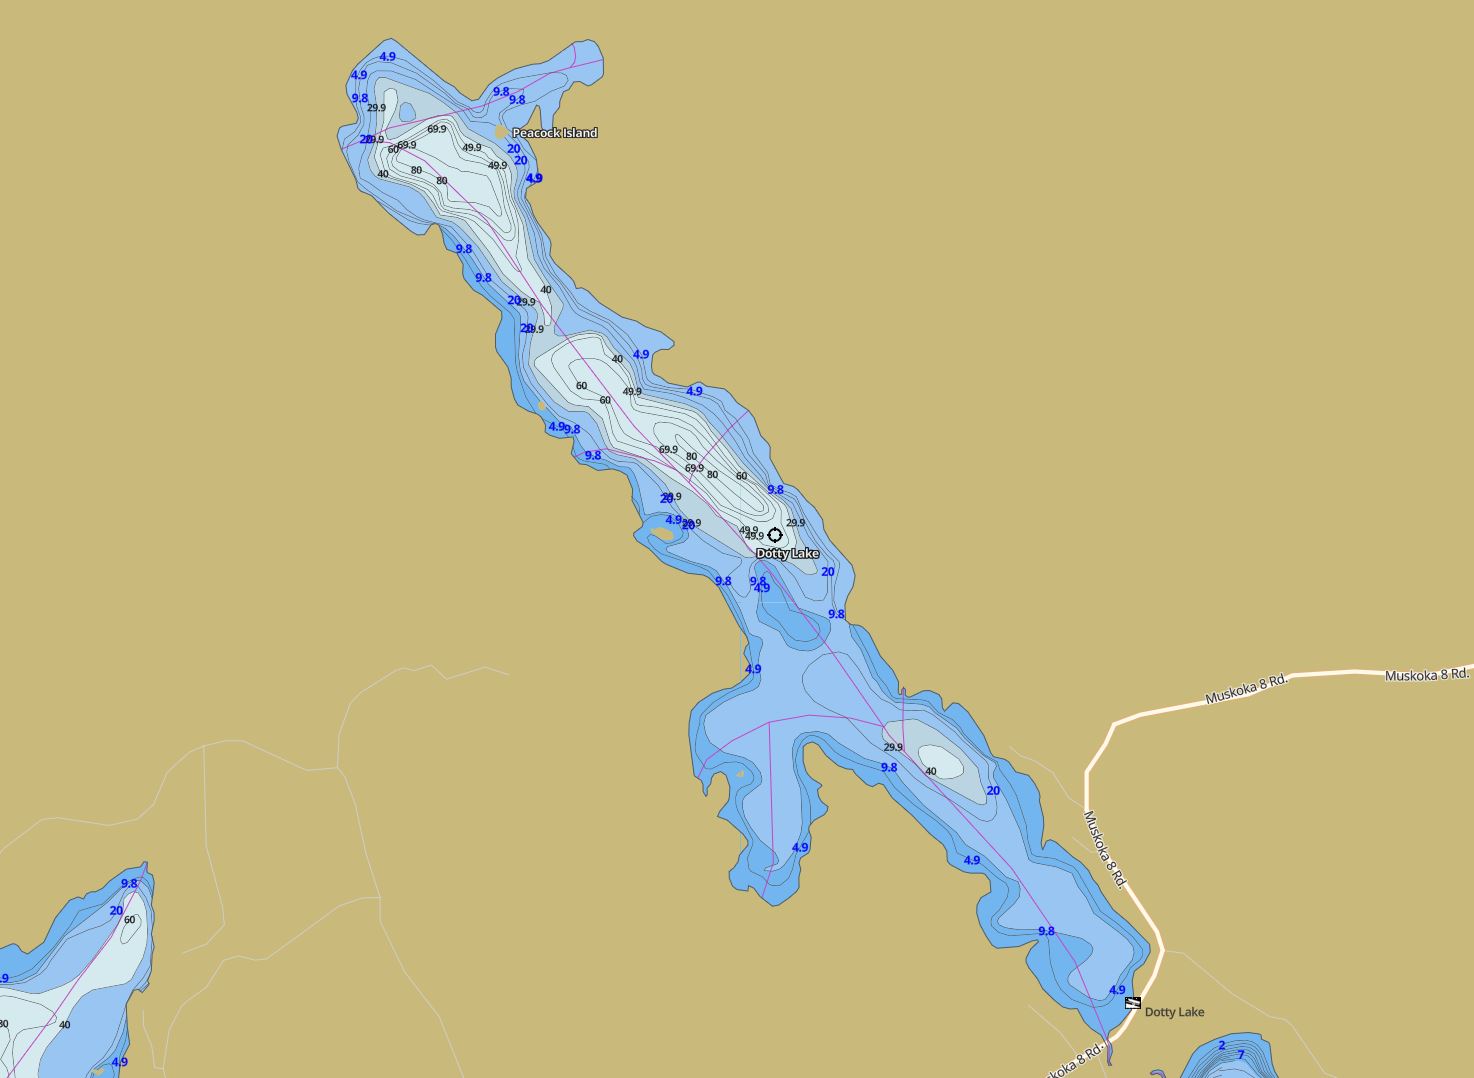 Contour Map of Dotty Lake in Municipality of Lake of Bays and the District of Muskoka